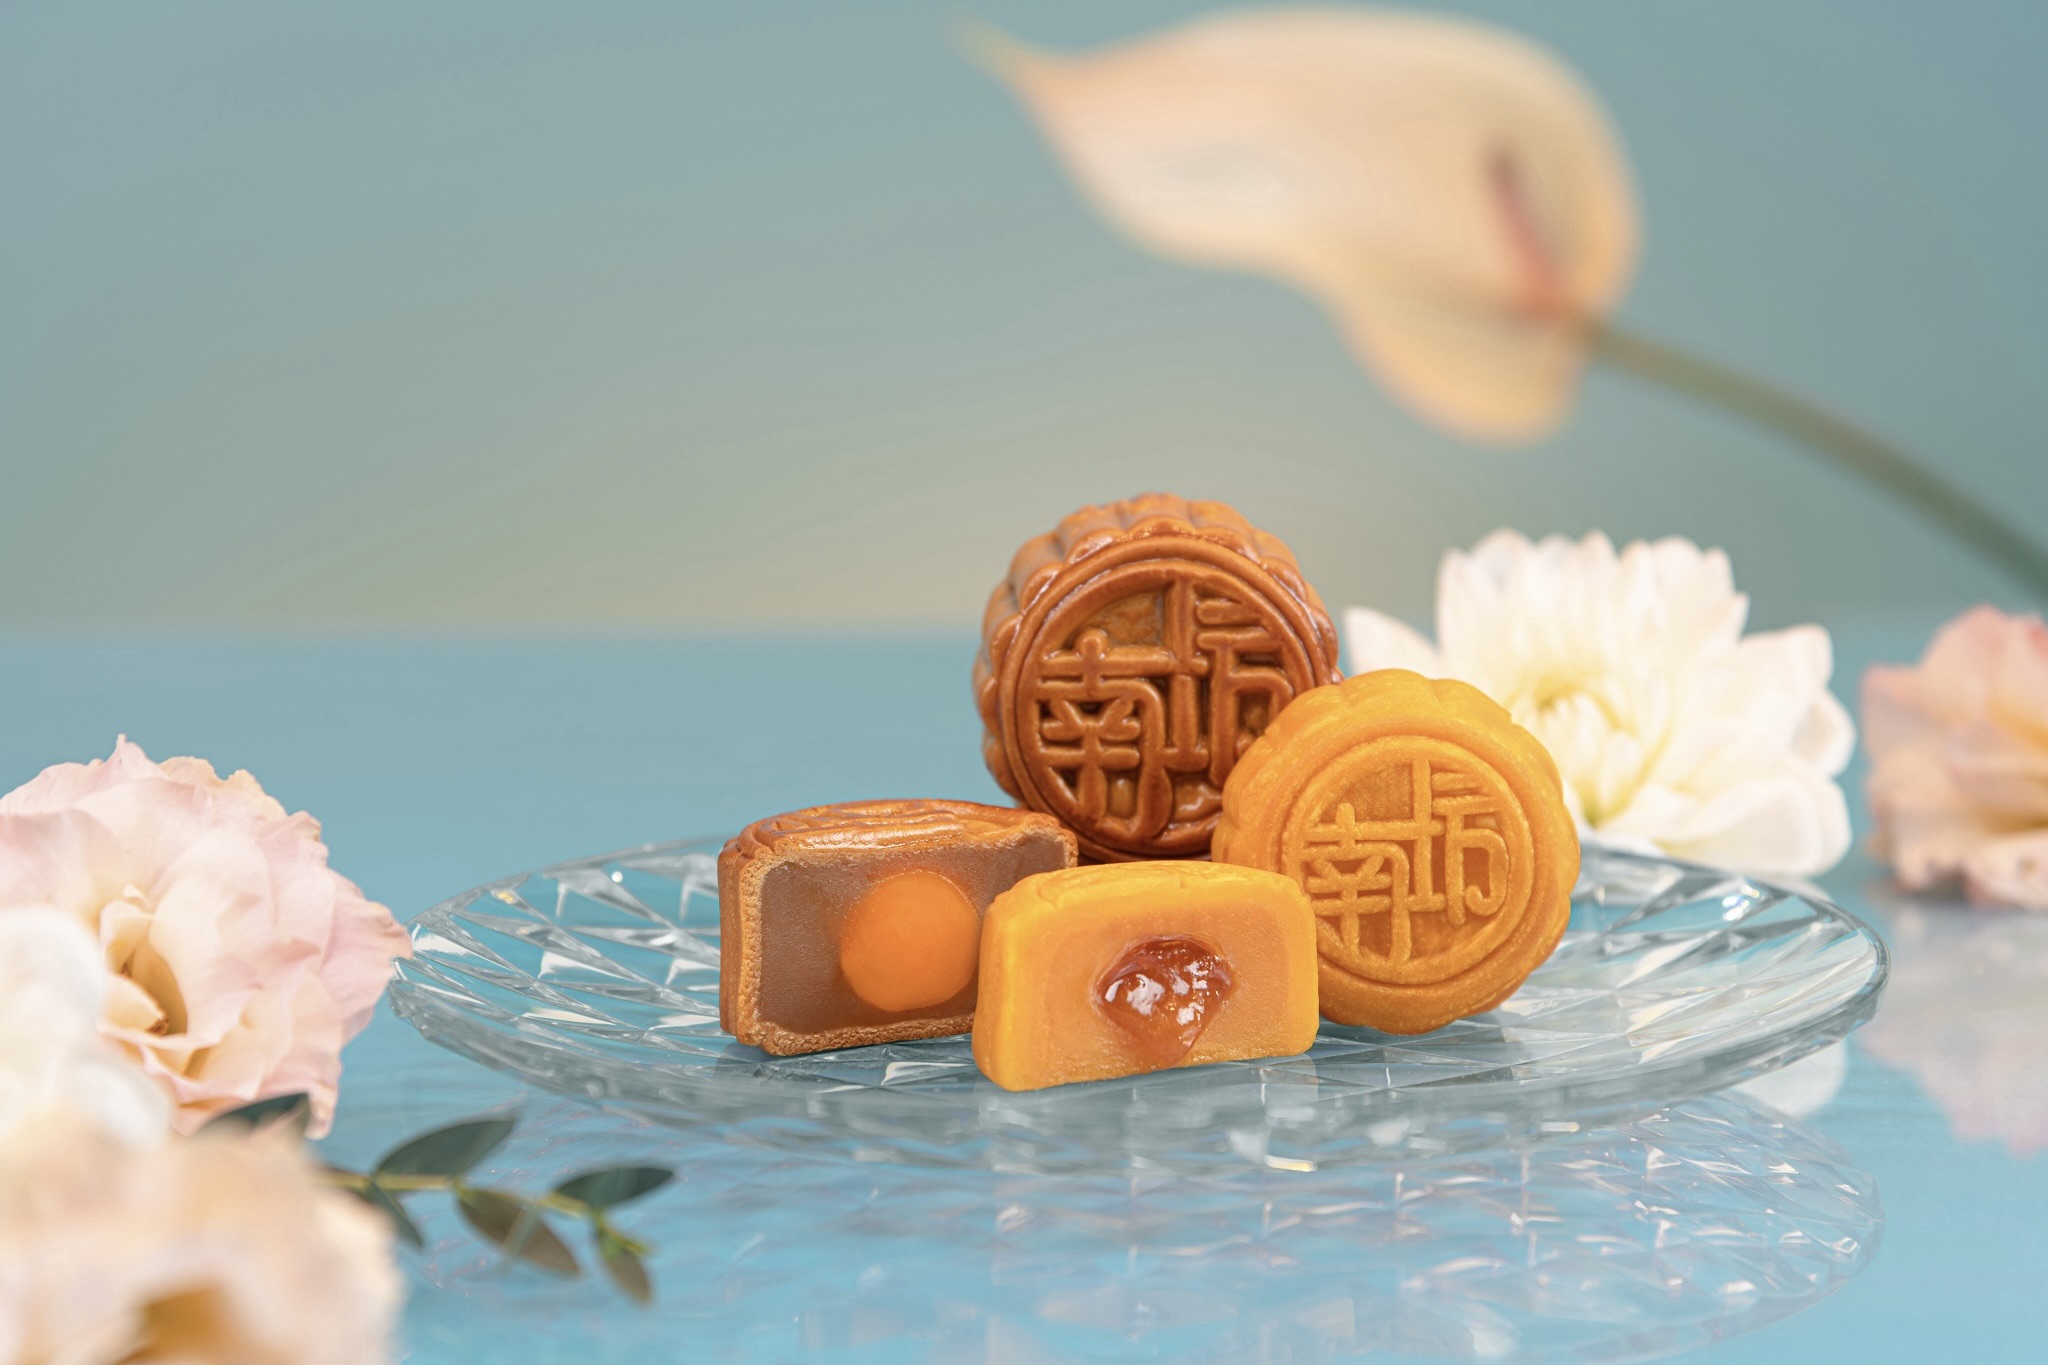 Two whole mini mooncakes sit on a glass plate, along with two mini mooncakes cut in half to reveal their fillings. The darker brown mooncakes at the back are the lotus seed paste with egg yolk, and the lighter brown ones in the front are the lava egg custard ones. The mooncakes are surrounded by flowers and placed on a blue table top.